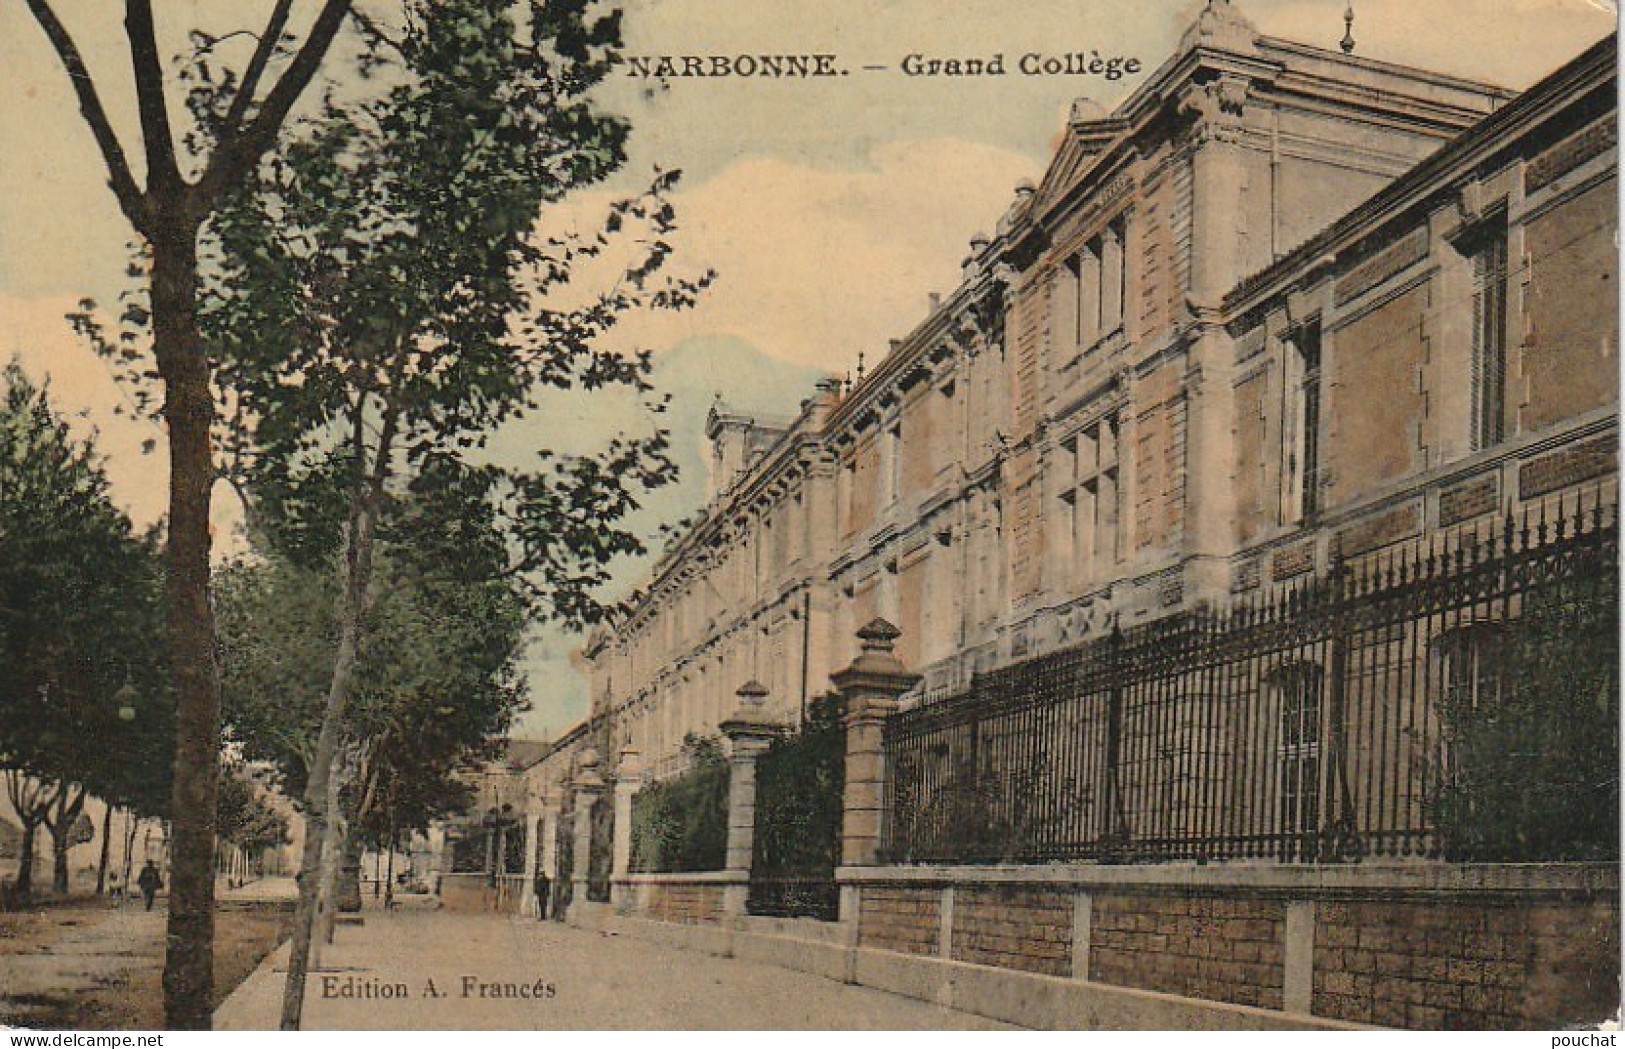 WA 22-(11) NARBONNE - GRAND COLLEGE - CARTE COLORISEE  - 2 SCANS - Narbonne